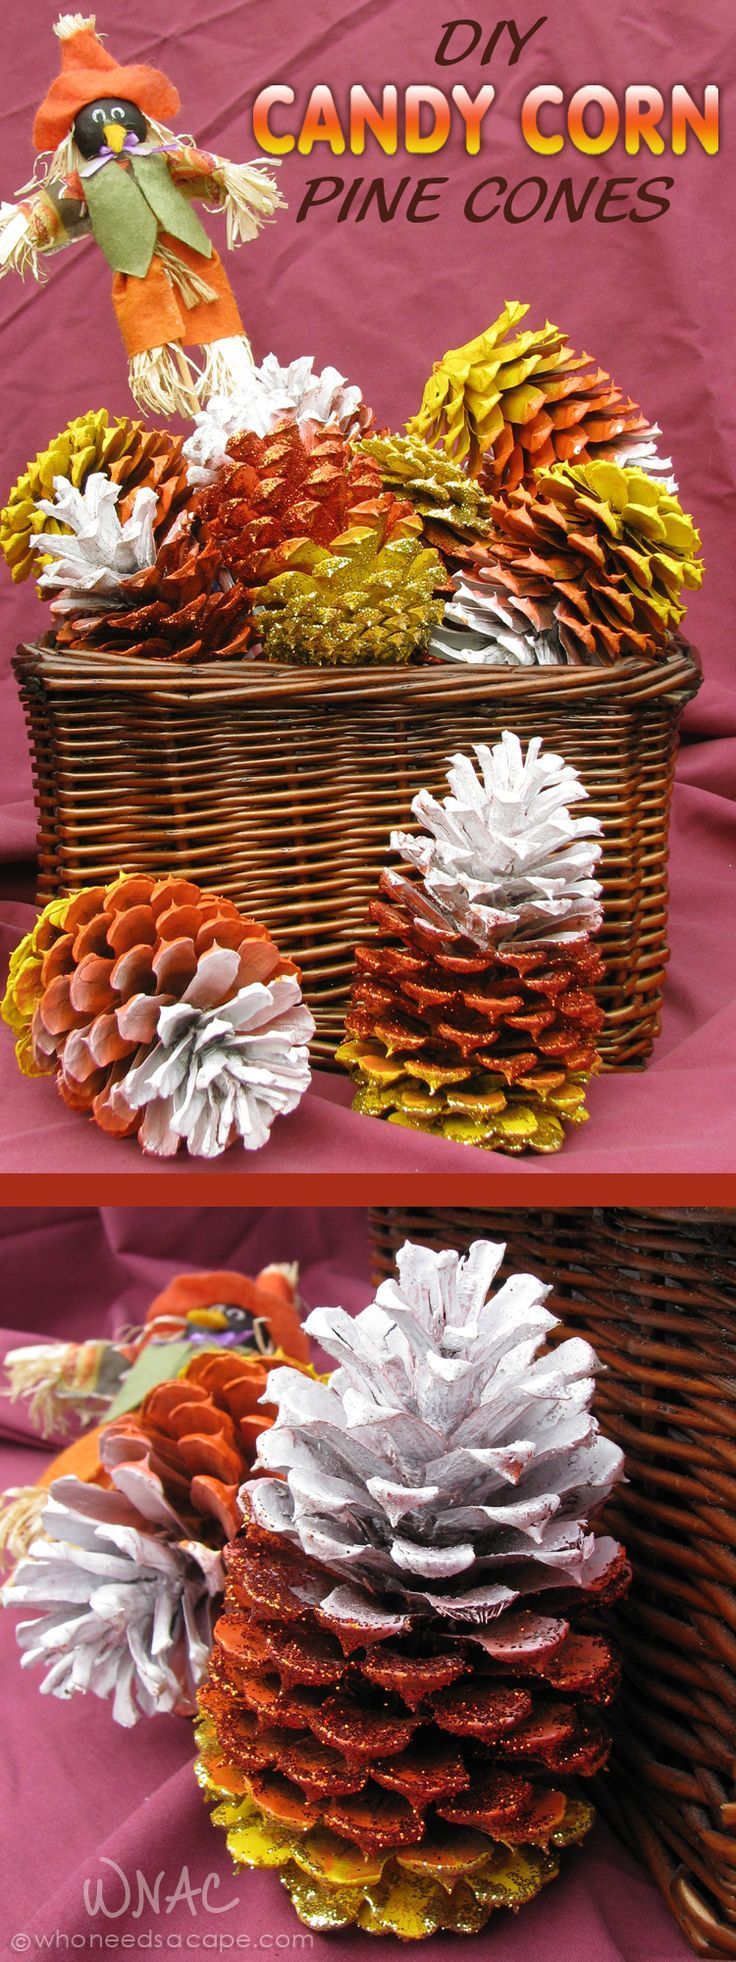 DIY Candy Corn Pine Cones a wonderful project for autumn decorating.